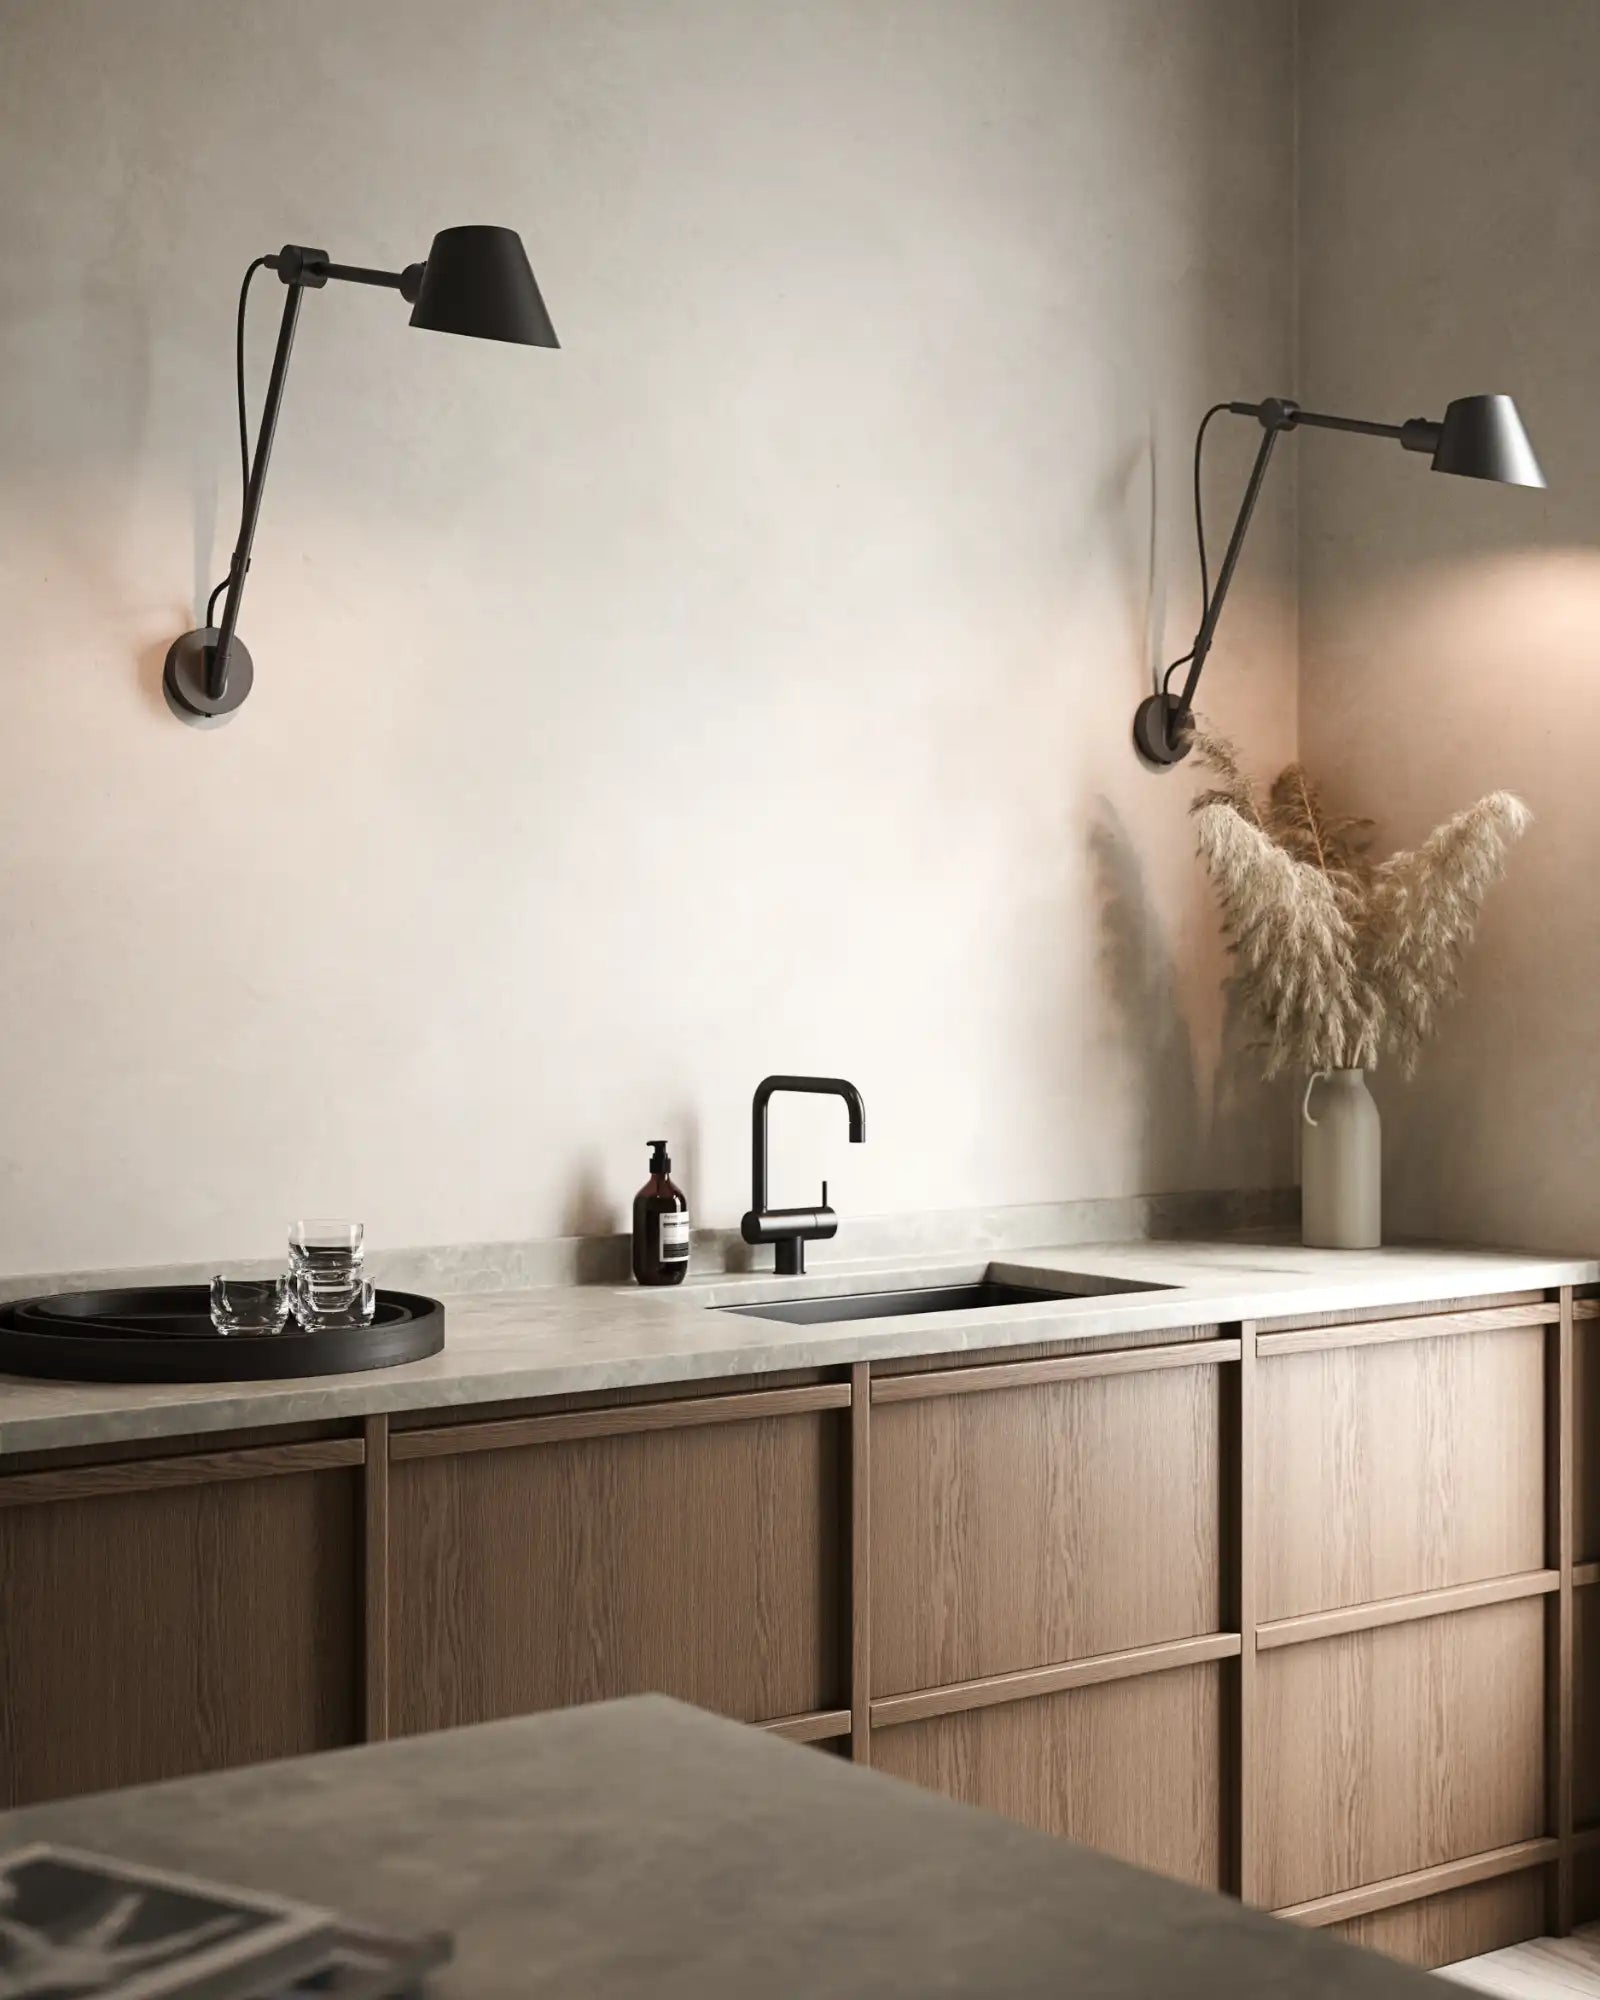 Stay Wall Light by Nordlux Lighting featured within a contemporary kitchen | Nook Collections